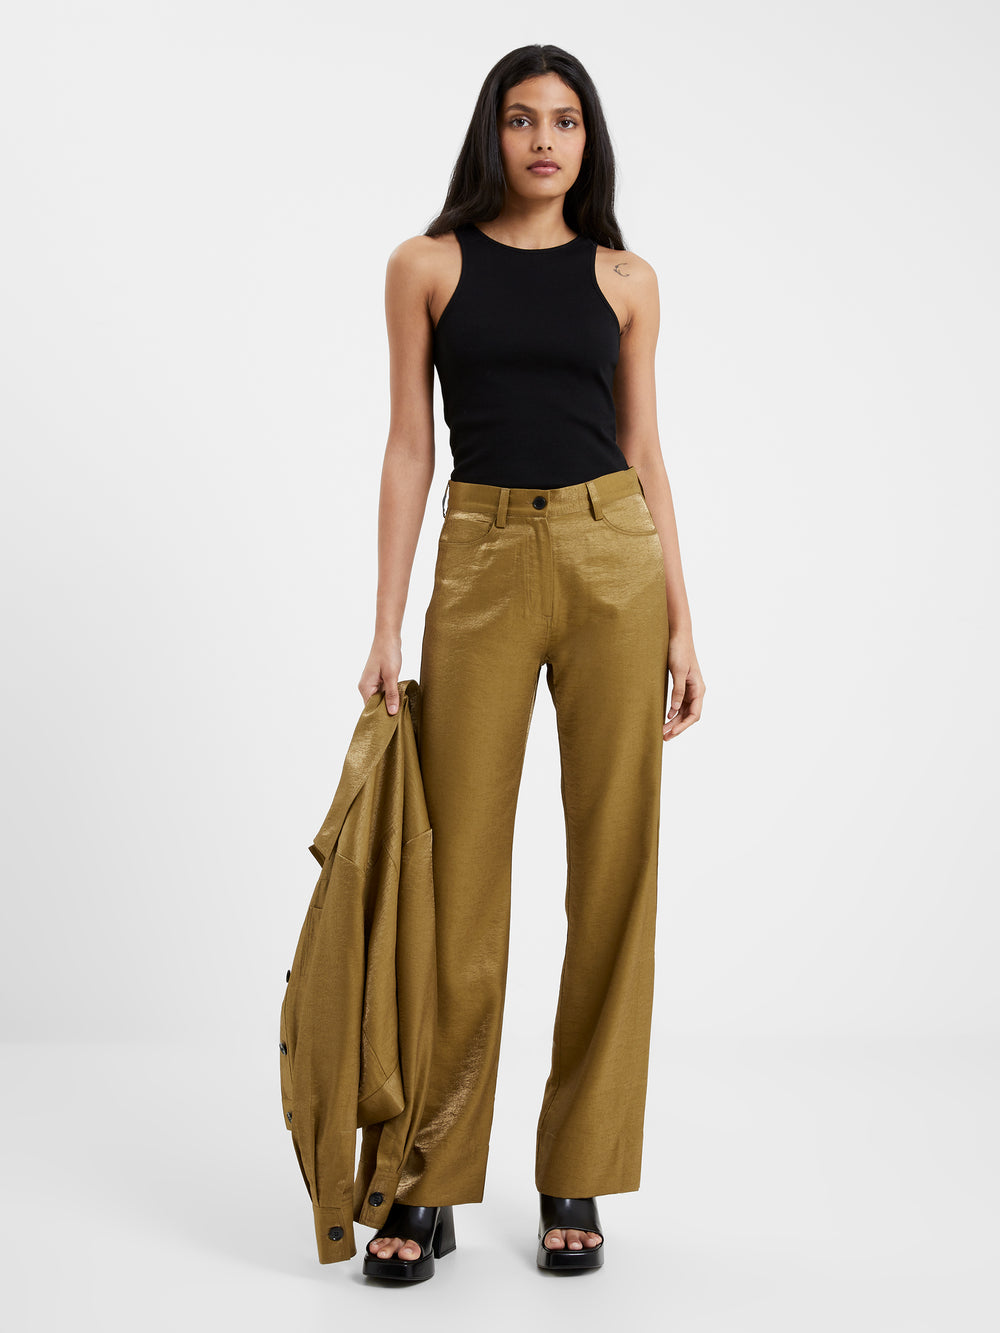 Cammie Shimmer Flare Trousers Nutria US Connection French 